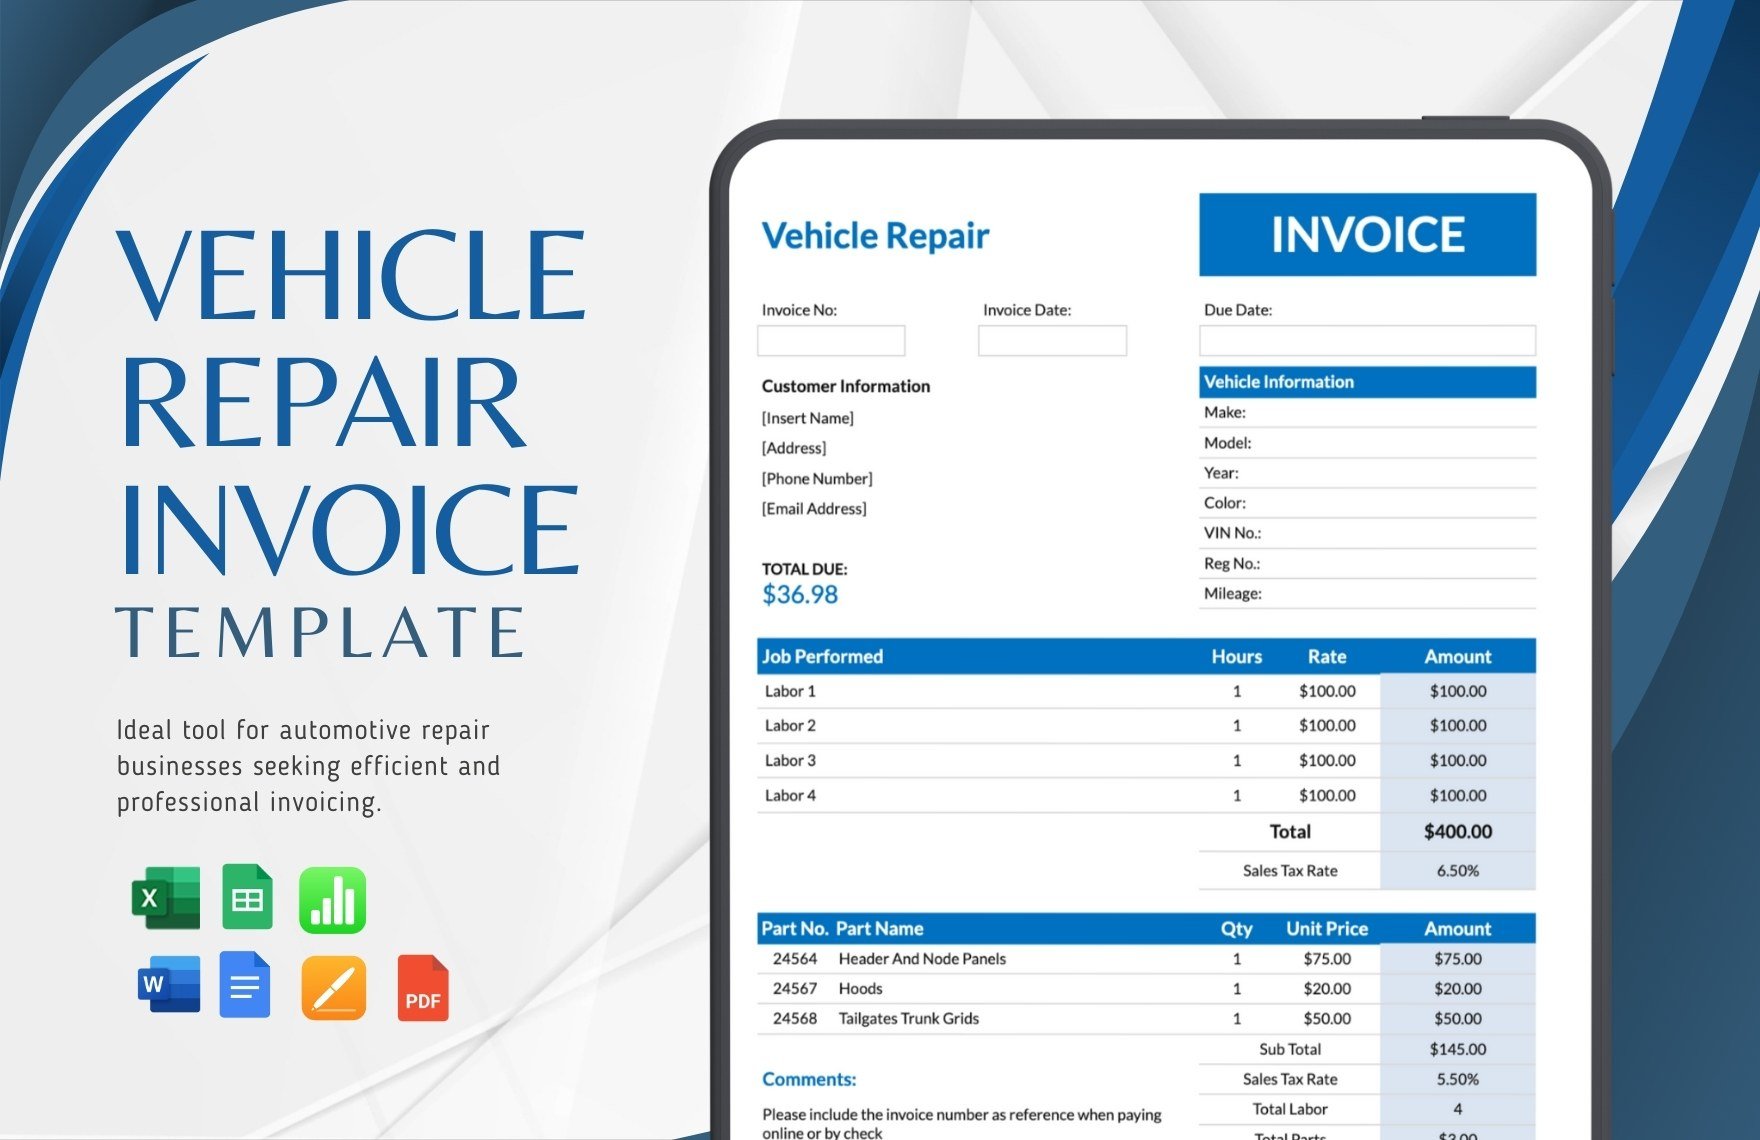 Vehicle Repair Invoice Template in Word, Google Docs, Excel, PDF, Google Sheets, Apple Pages, Apple Numbers